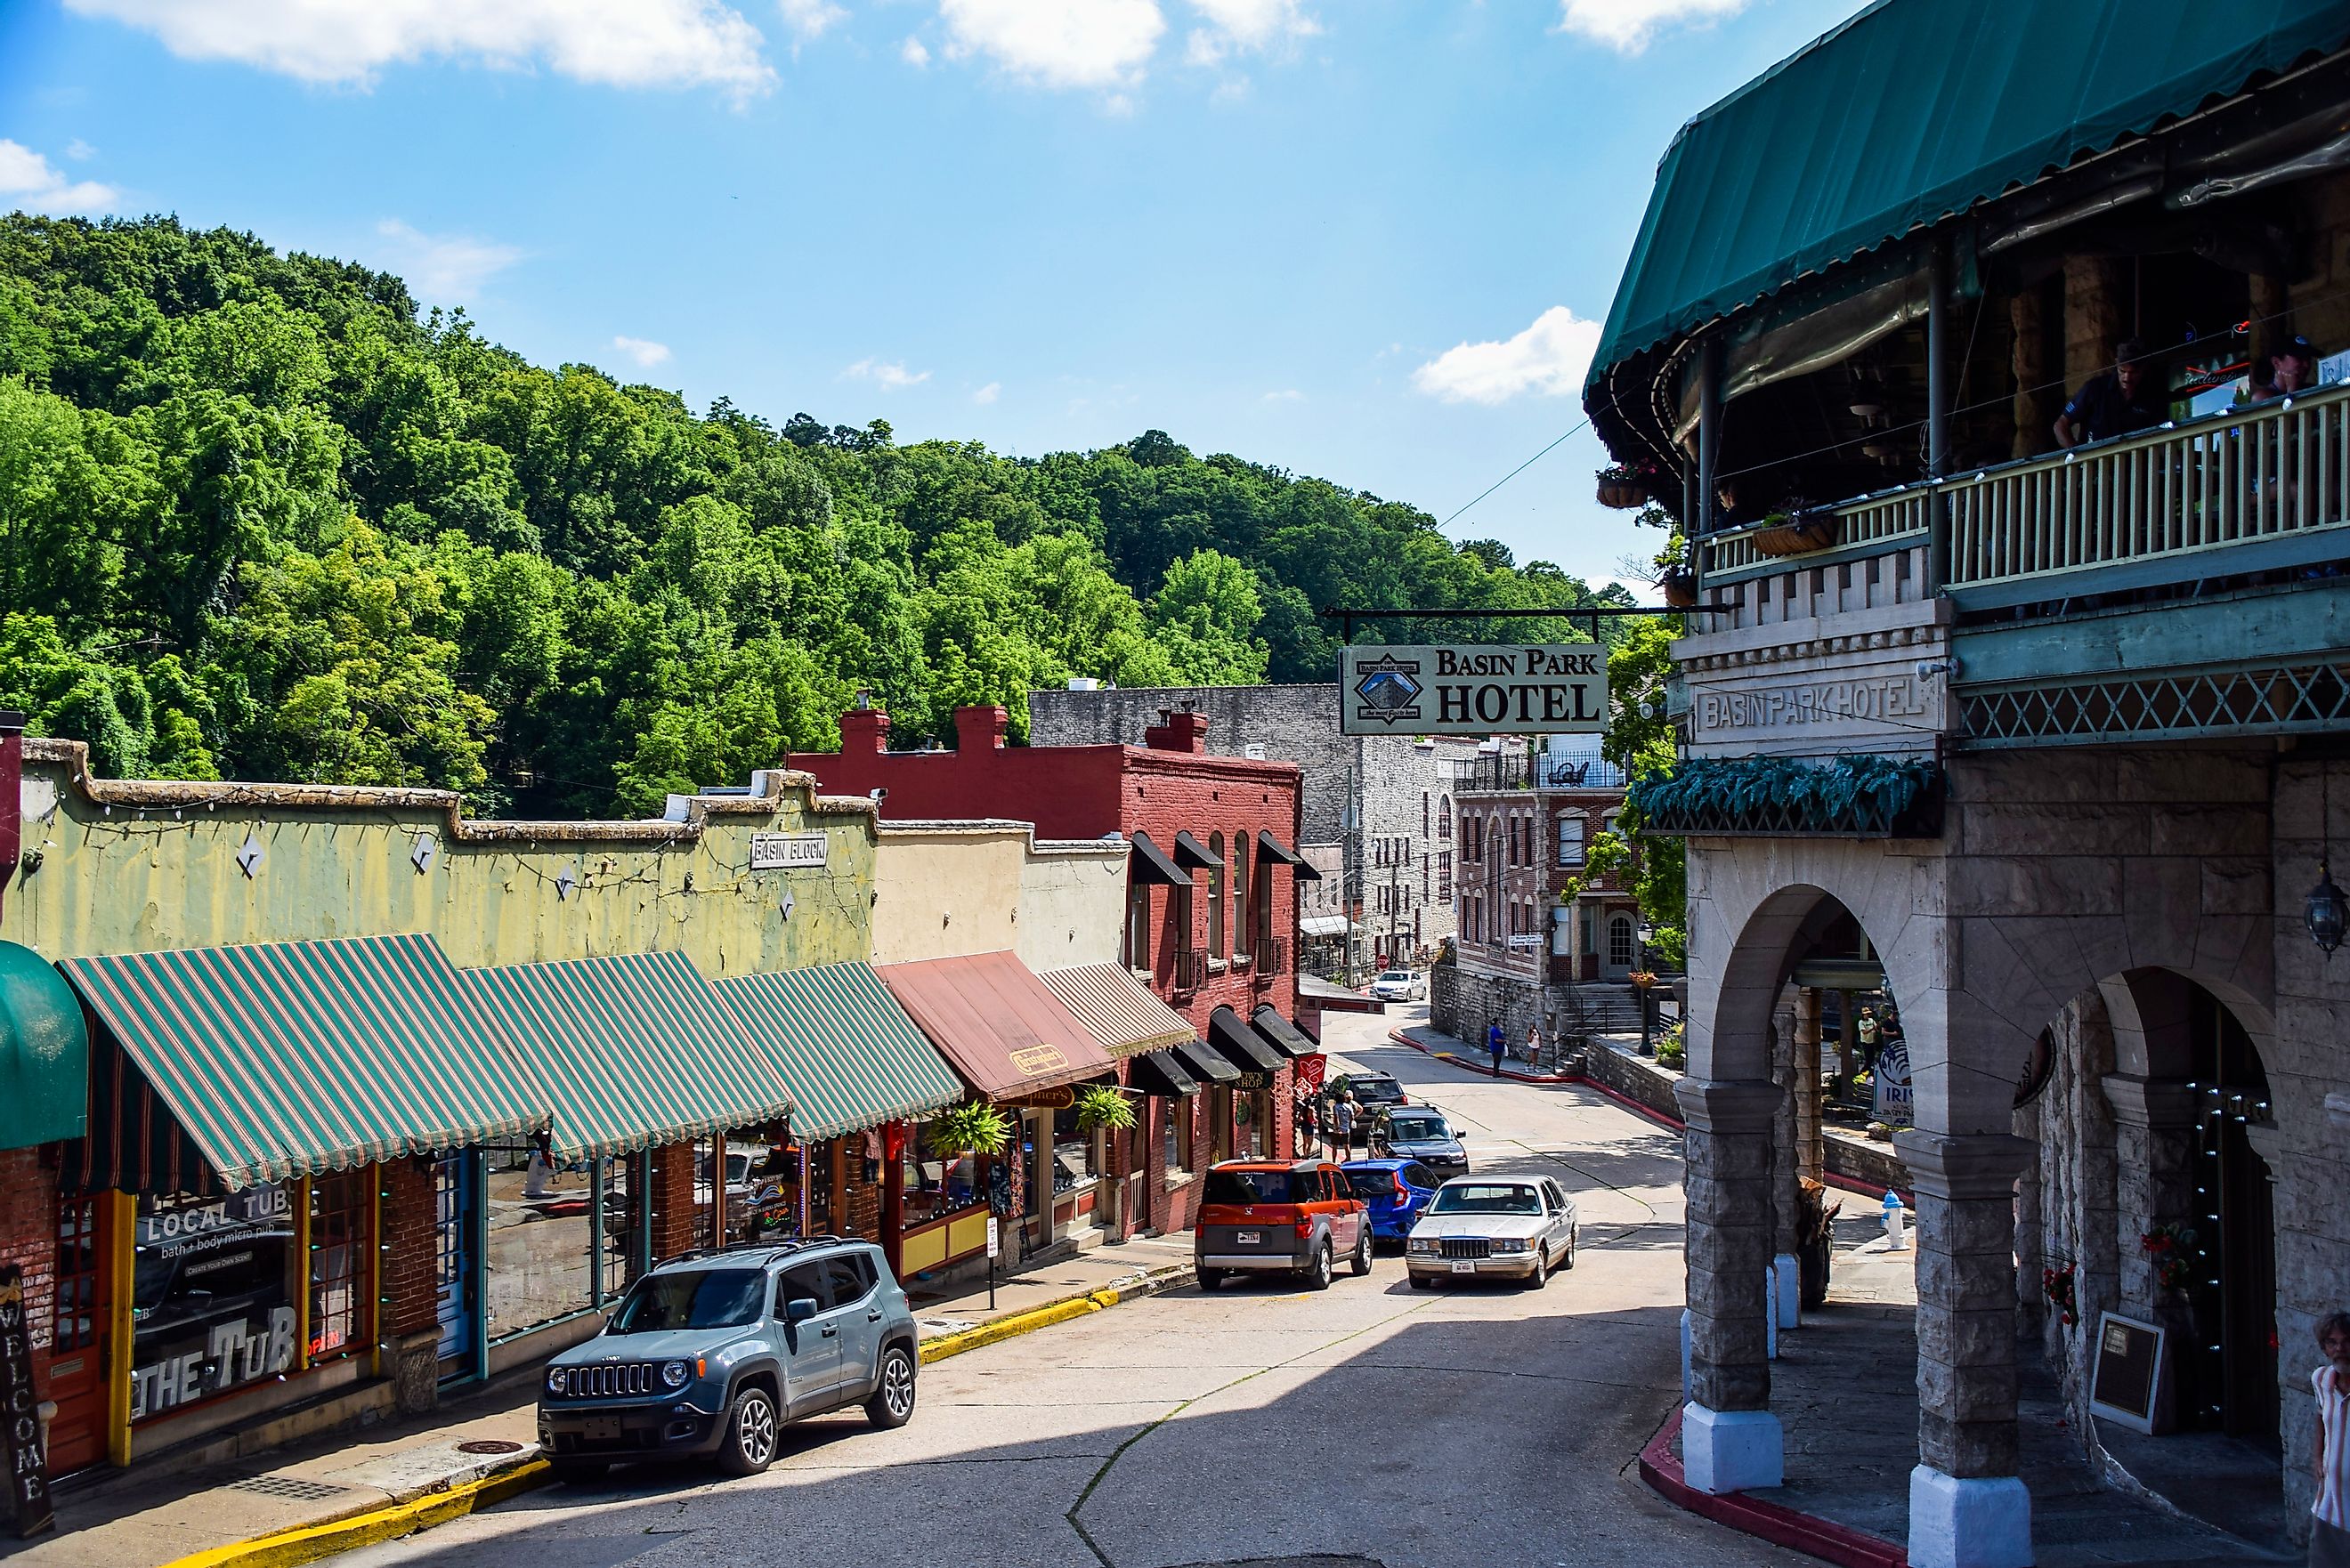 Historic downtown Eureka Springs, Arkansas, with boutique shops and famous buildings.